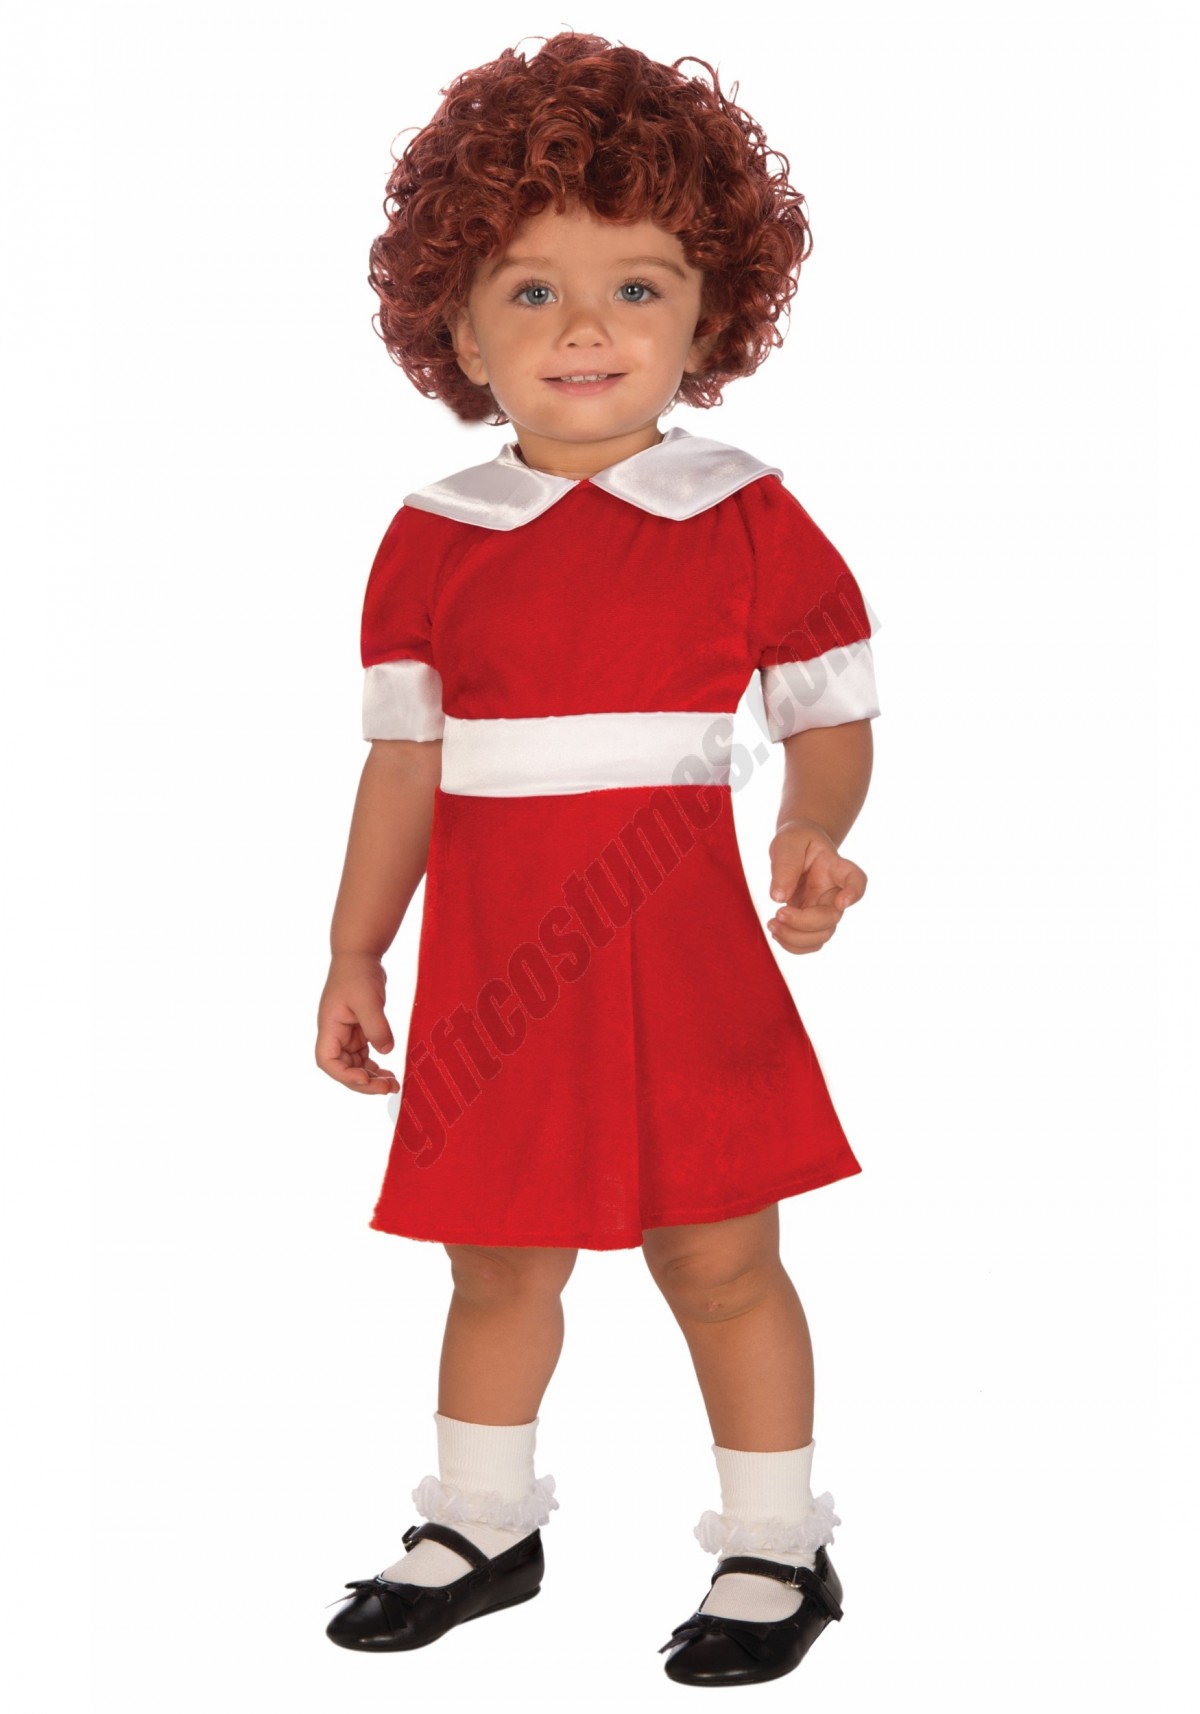 Toddler Annie Costume Promotions - -0